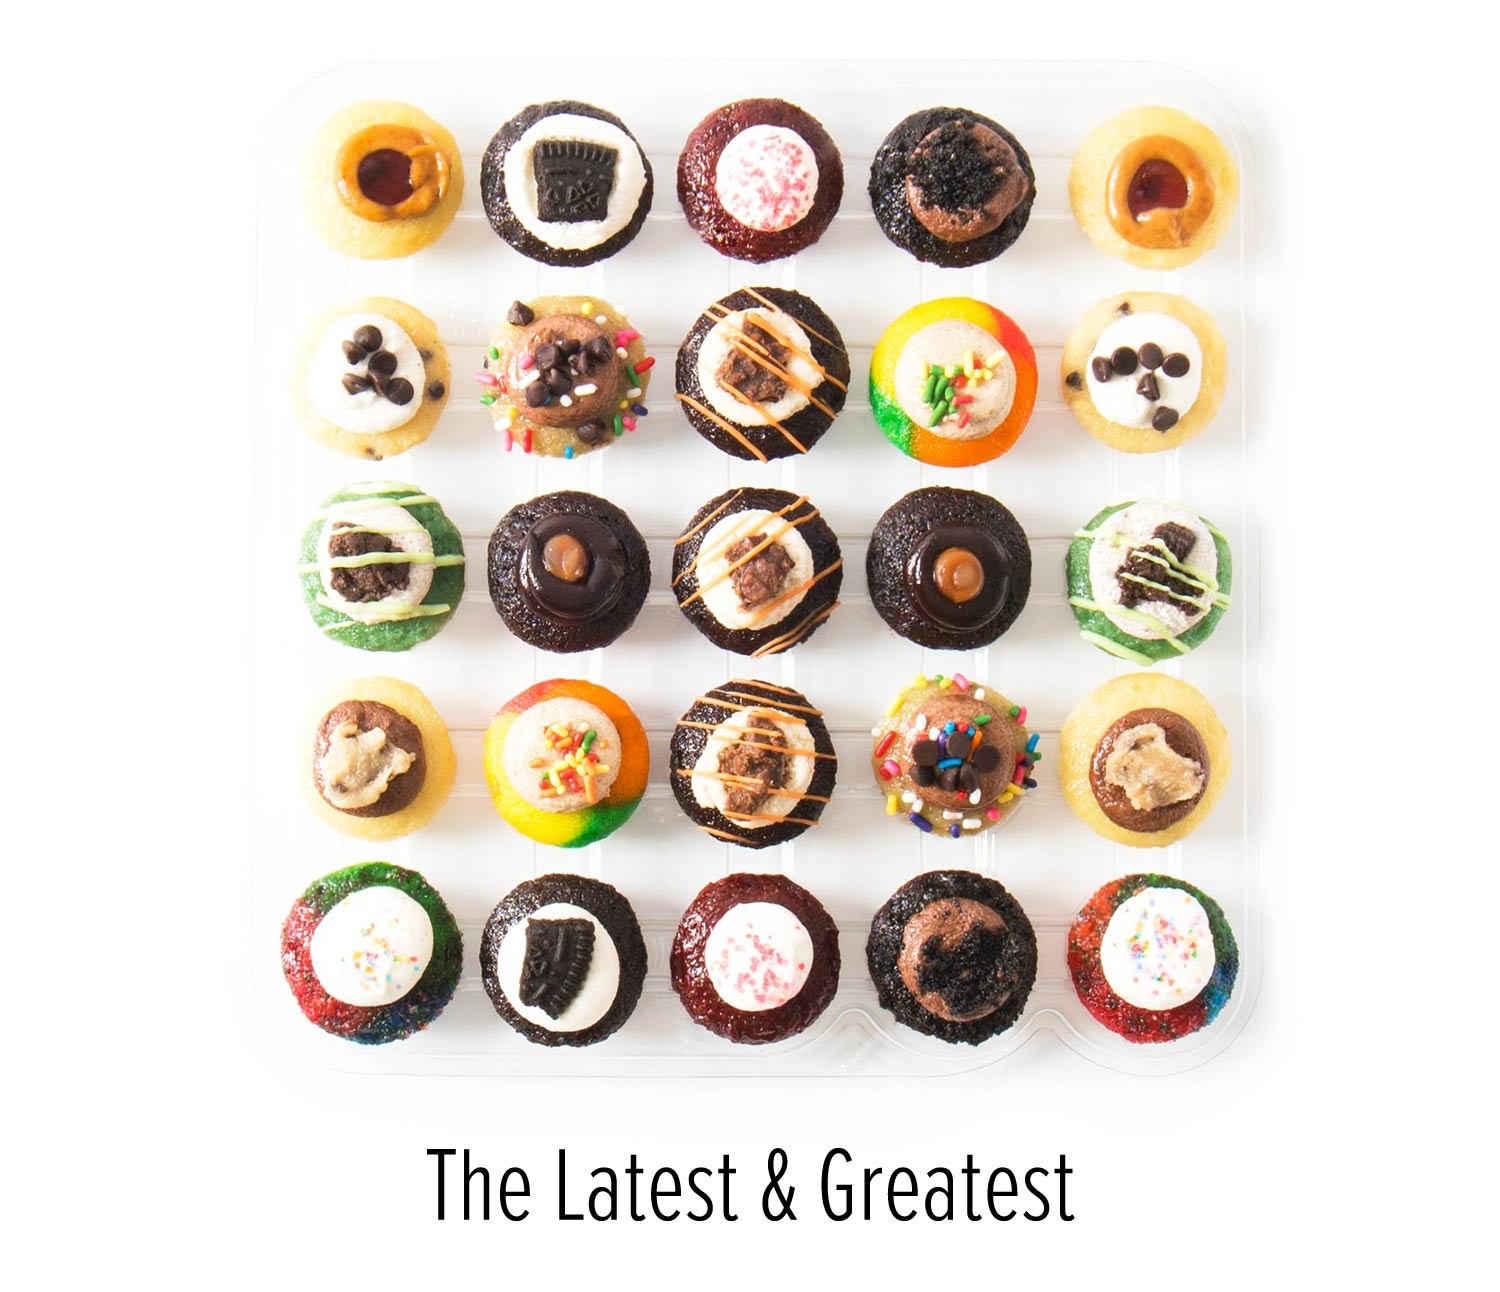 the latest & greatest cupcakes assortment